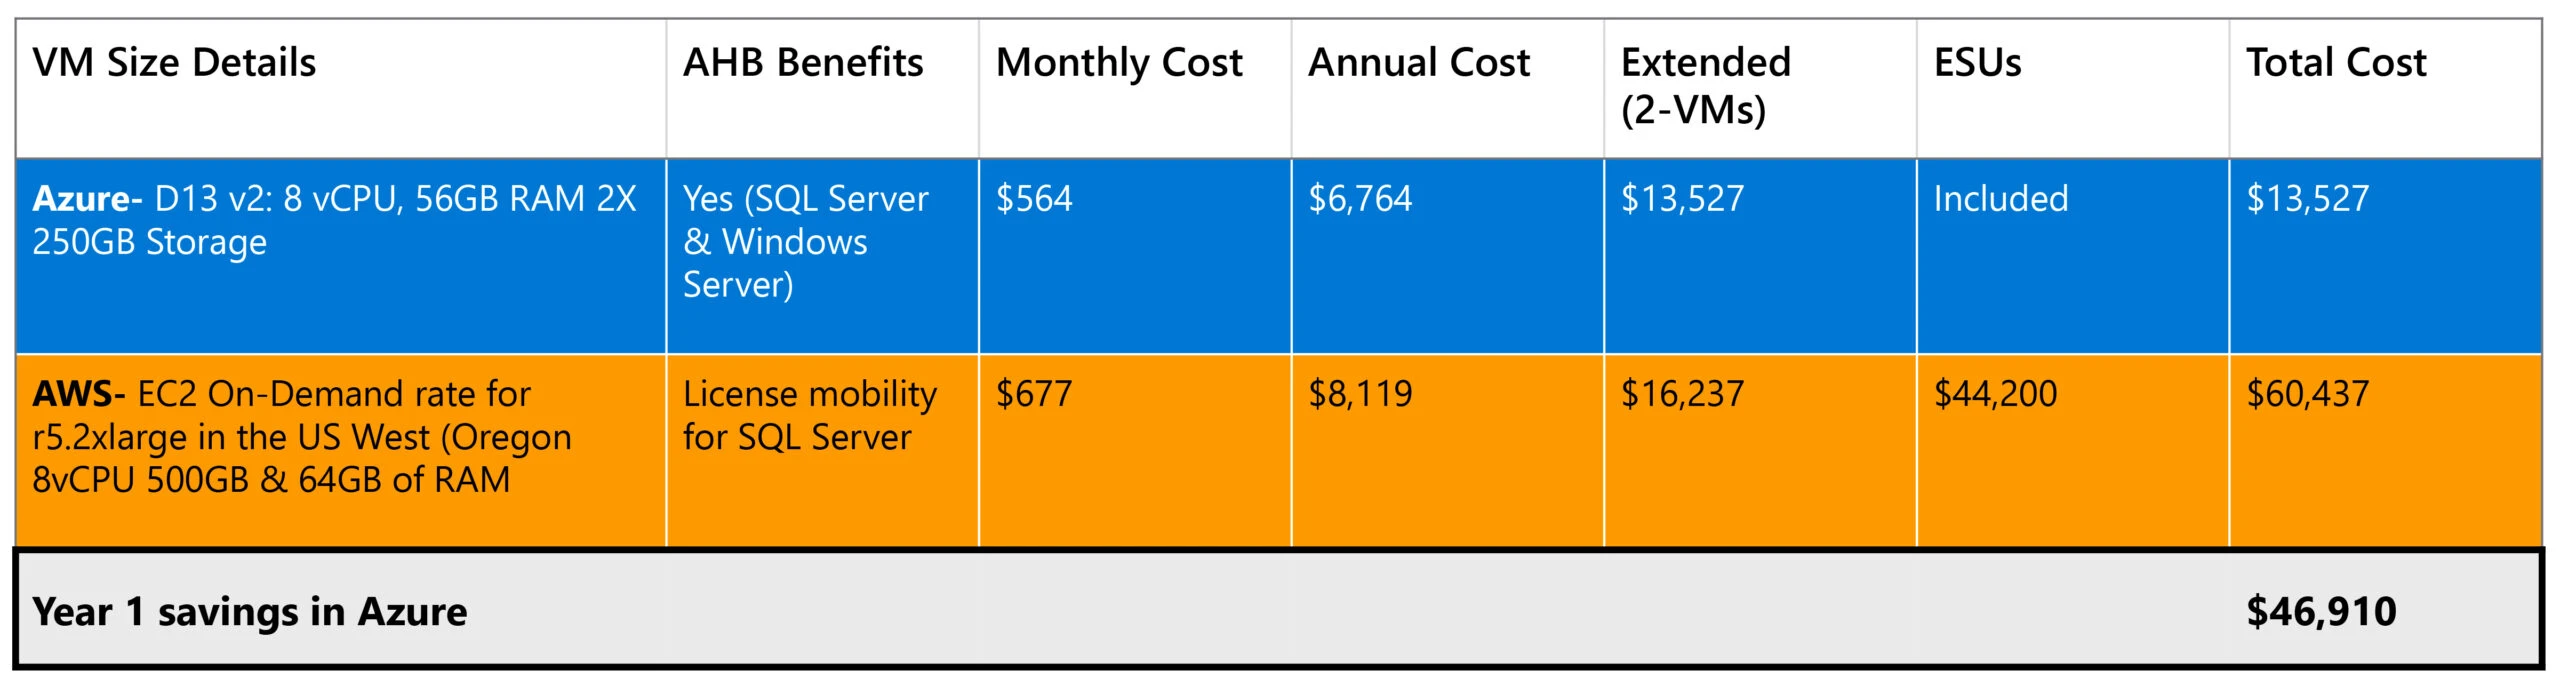 Compared to SQL Server 2012 on AWS EC2 using SQL Server License Mobility and purchasing Extended Security Updates, moving your SQL Server 2012 to an Azure VM using Microsoft’s Azure Hybrid Benefit for Windows Server and SQL Server and getting Extended Security Updates for free saves over $46,910.